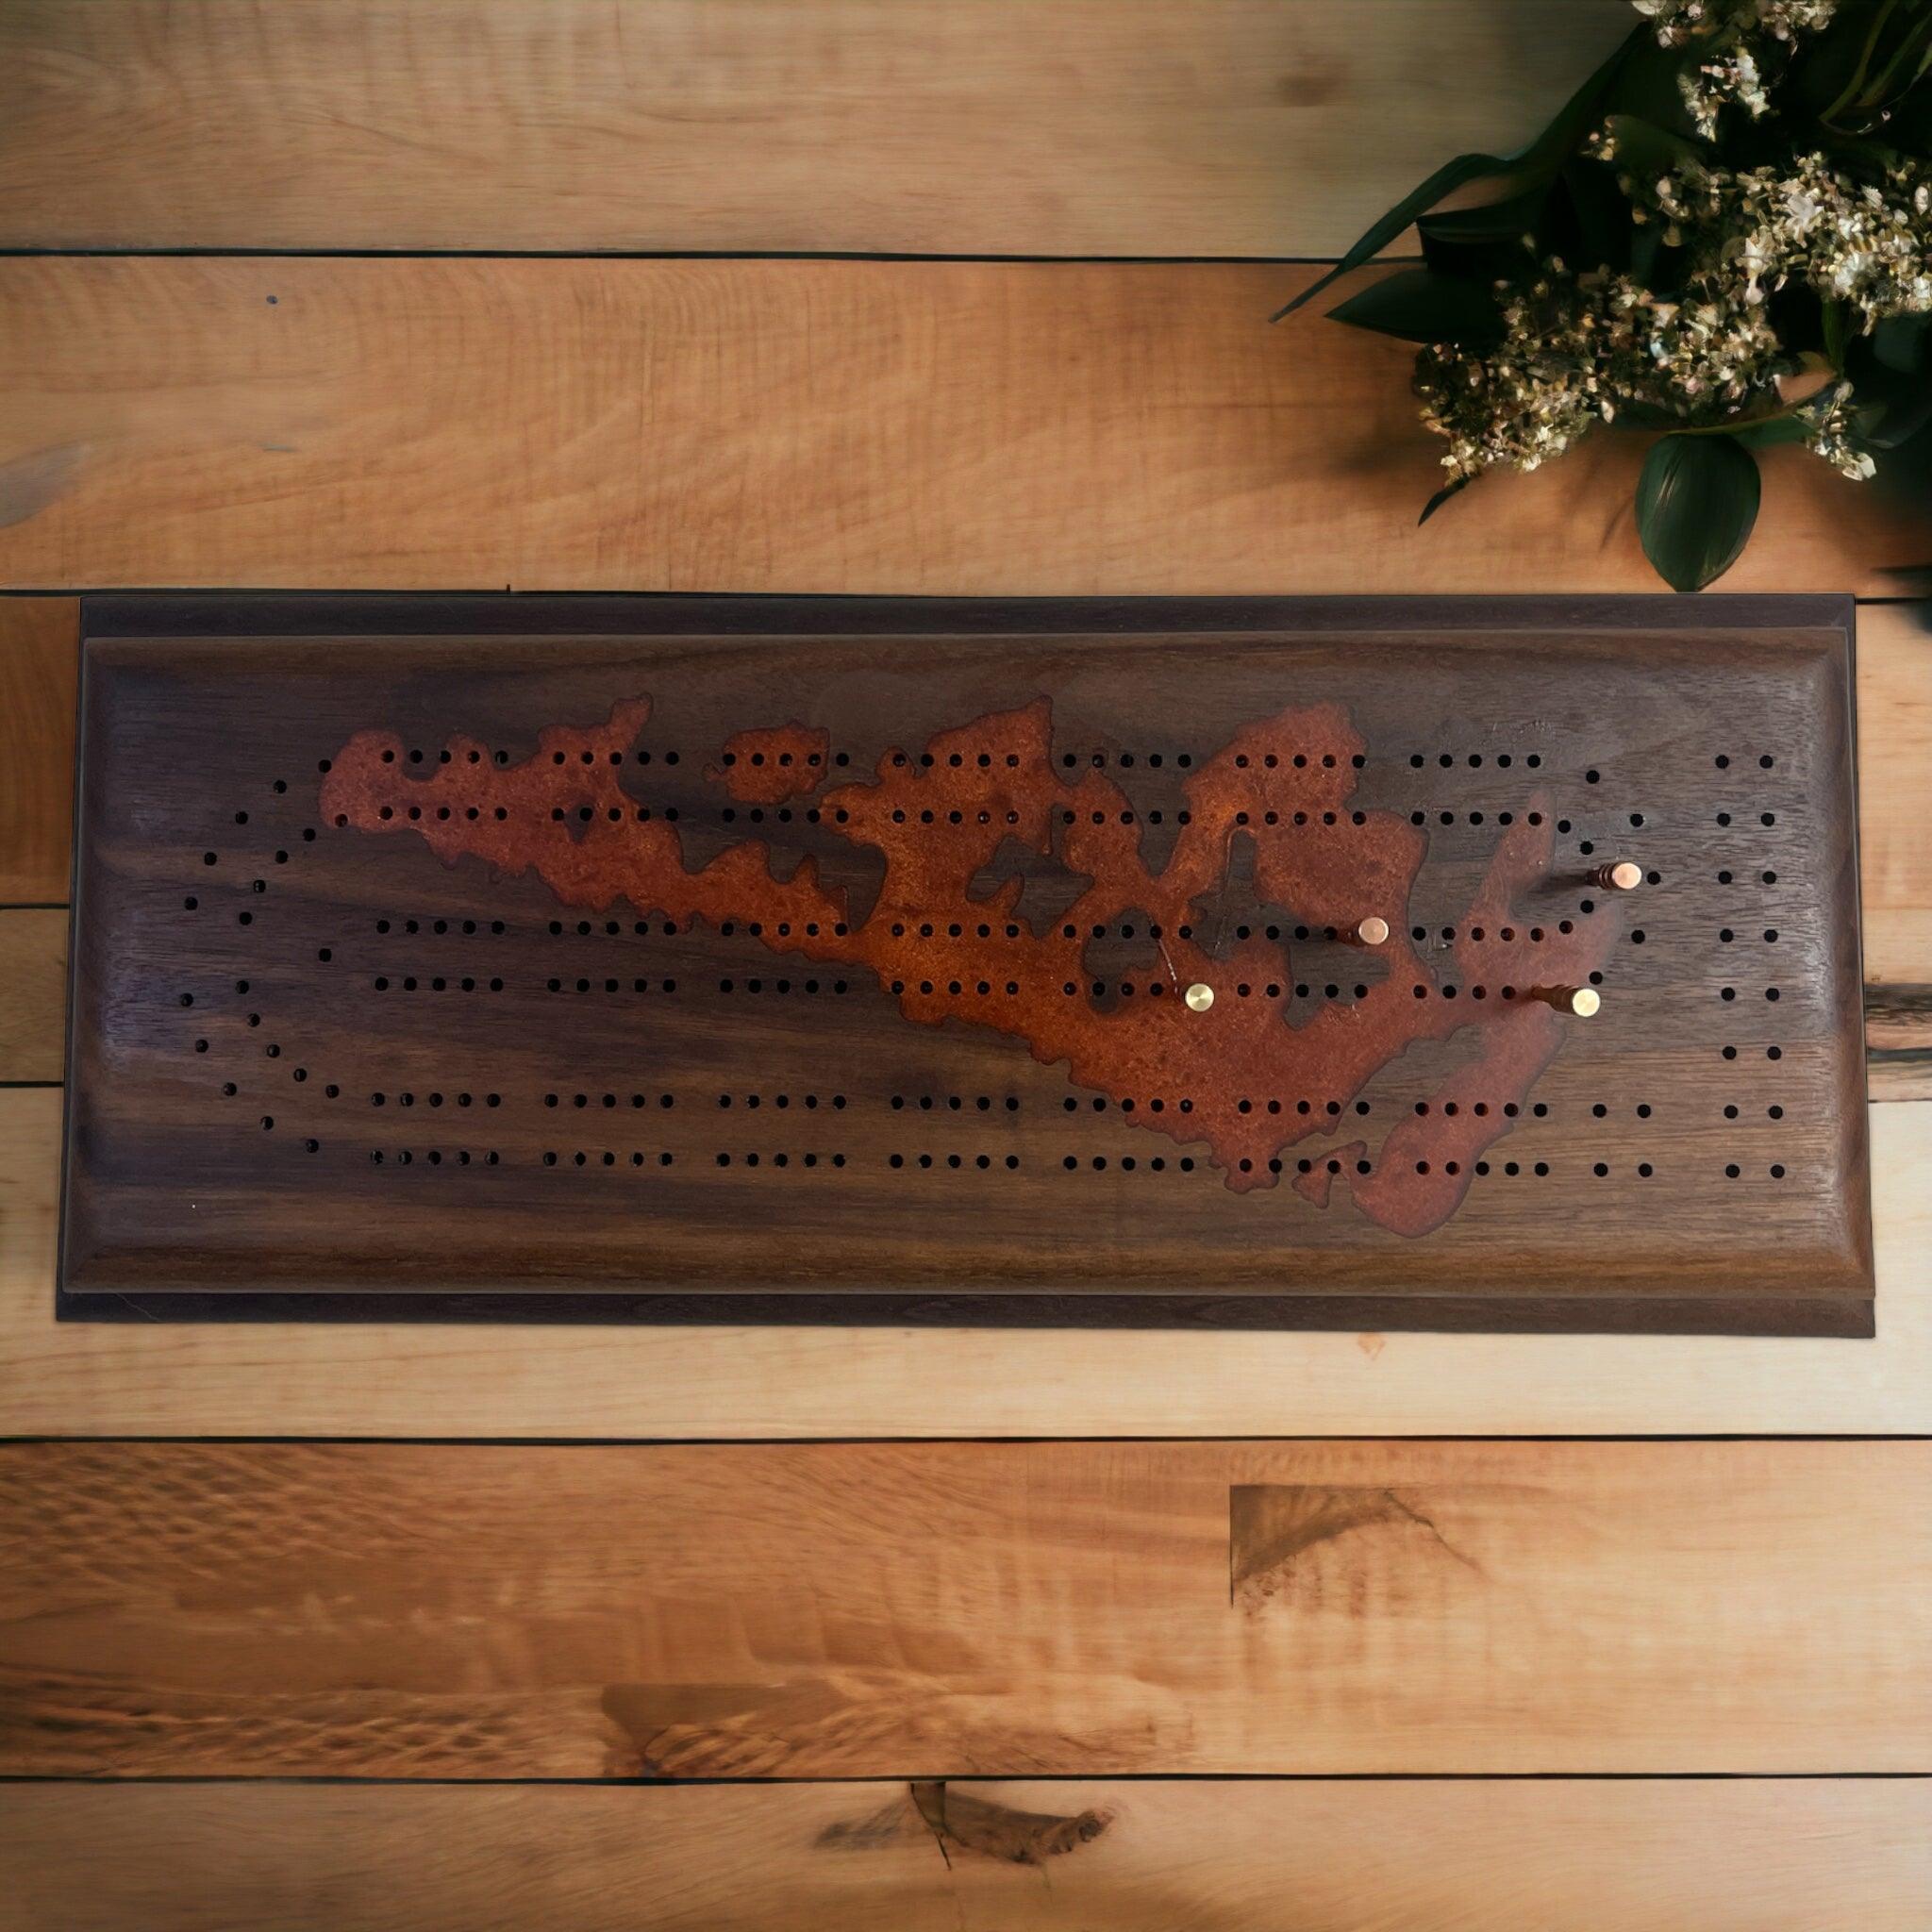 Manitoulin cribbage board - We have the wood